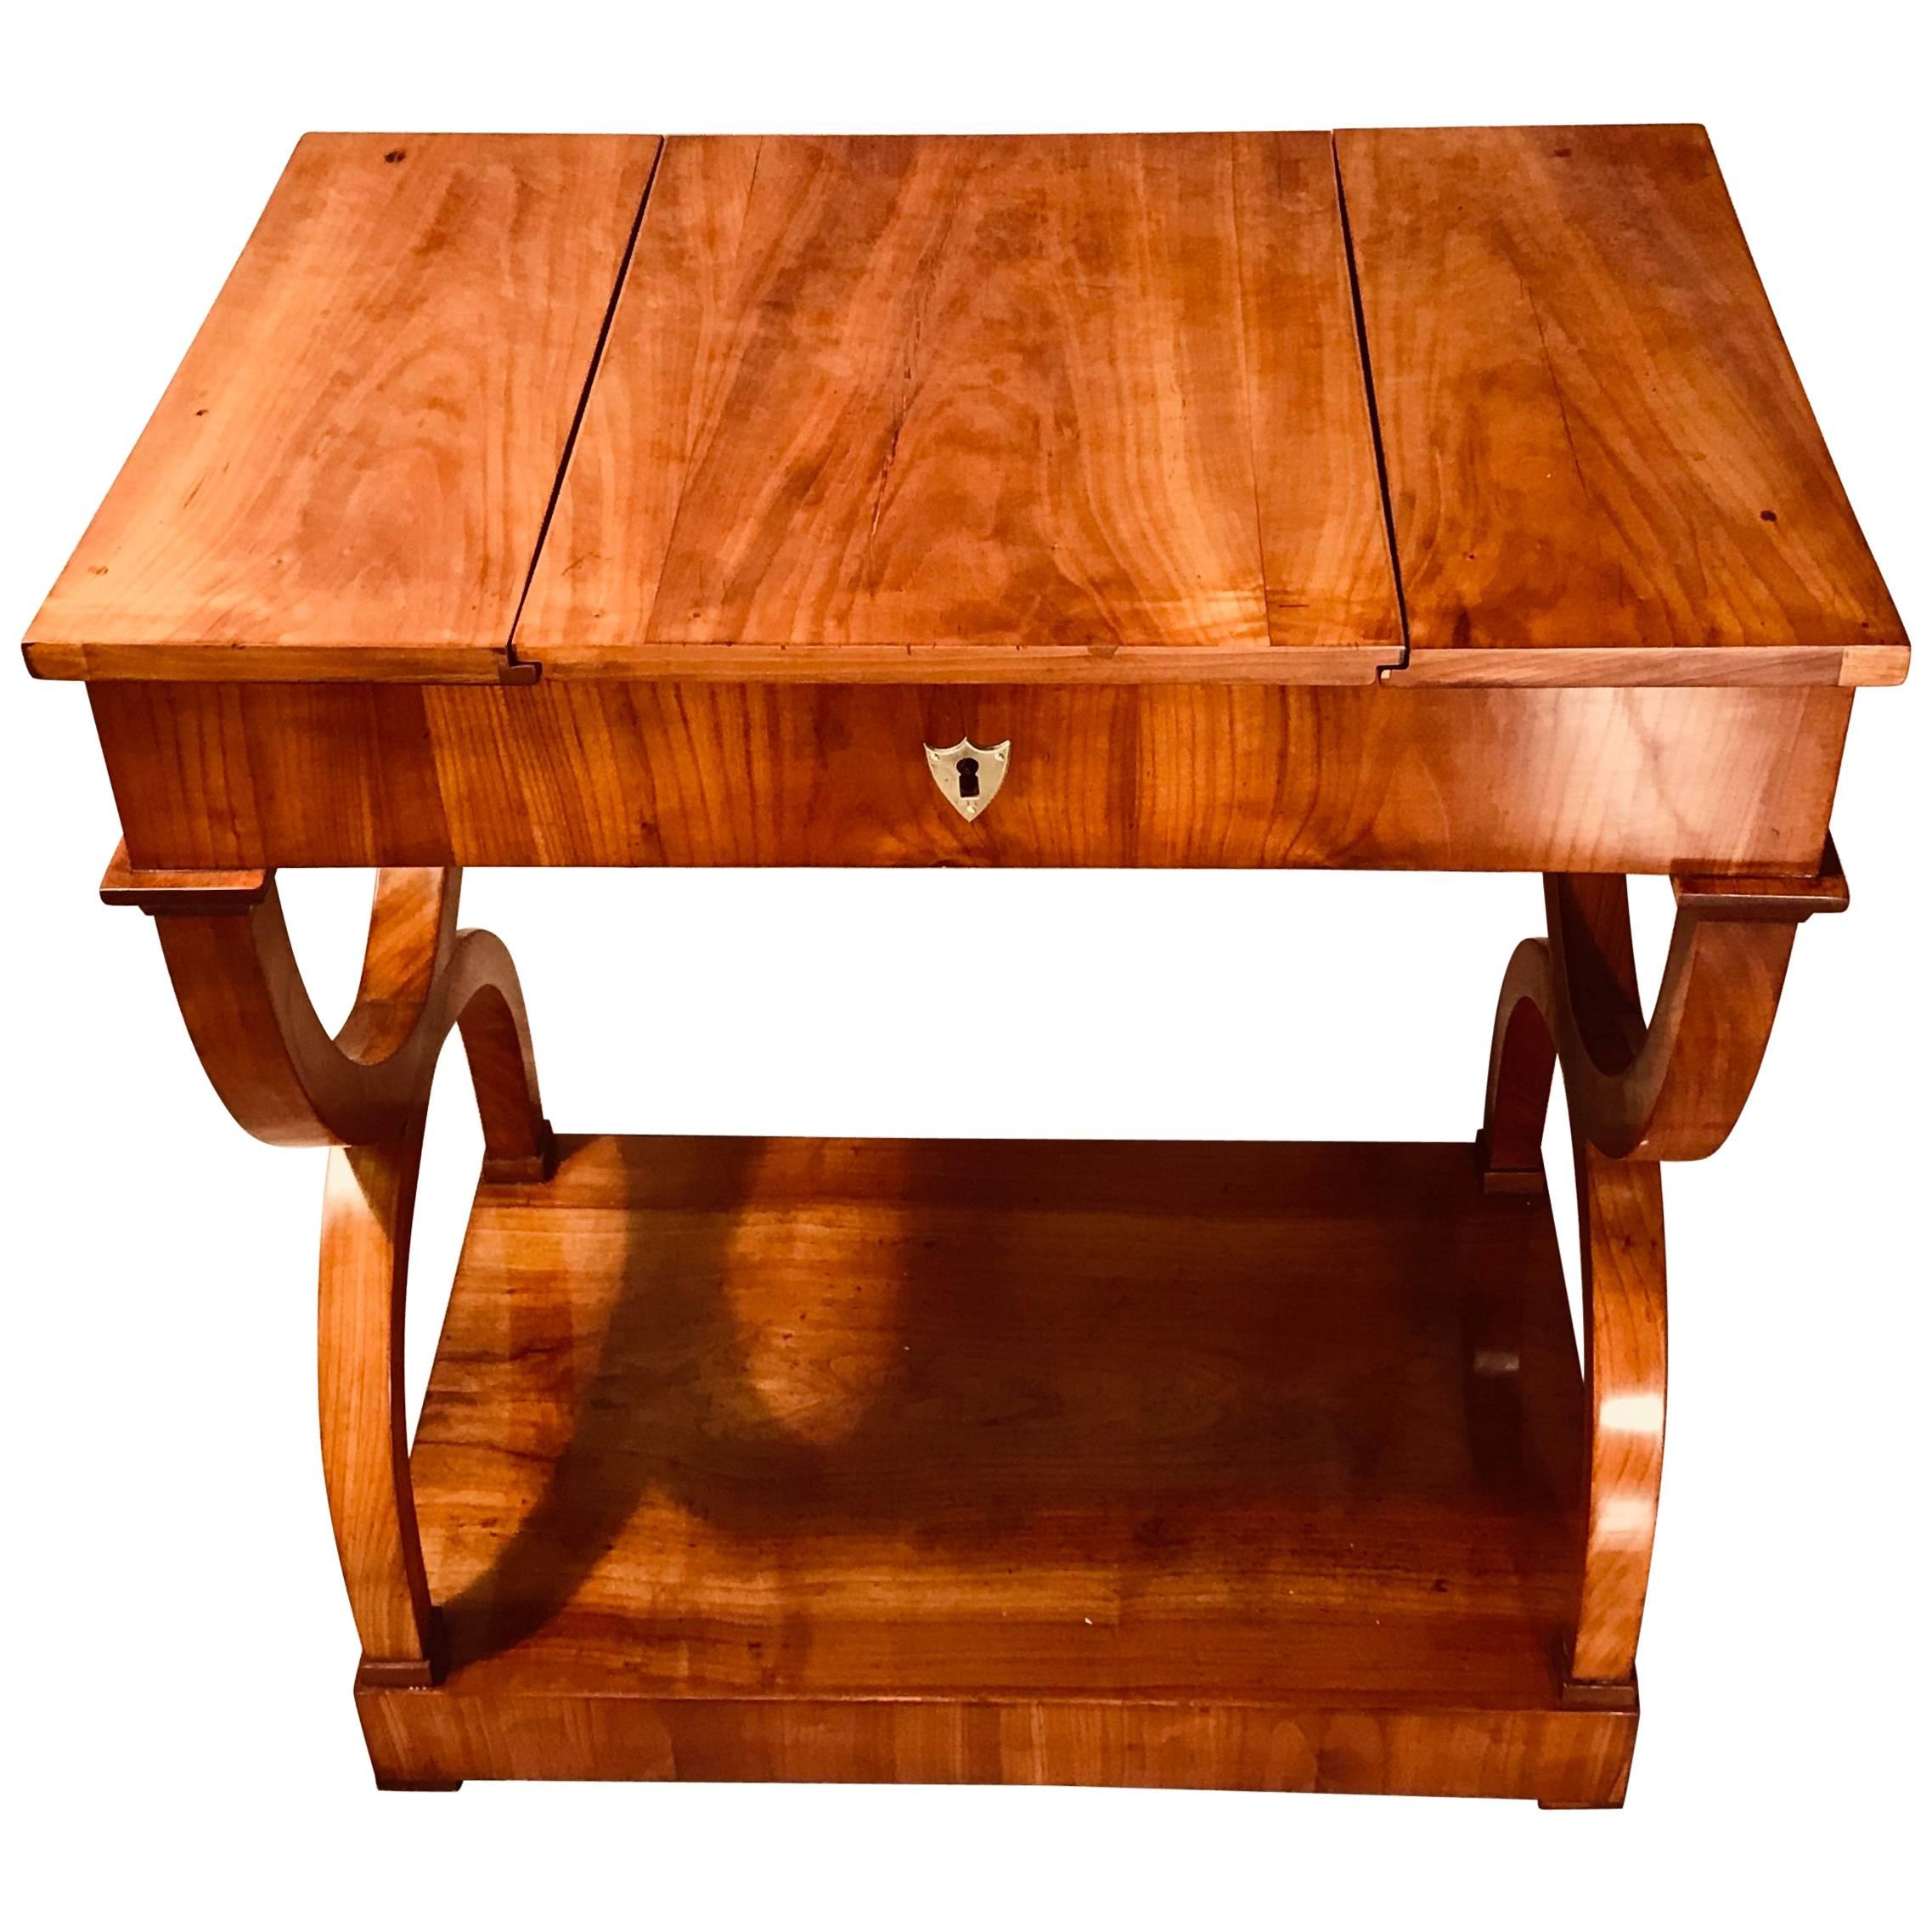 Biedermeier Sewing-or Working Table, Munich, 1810-1820, cherry wood For Sale